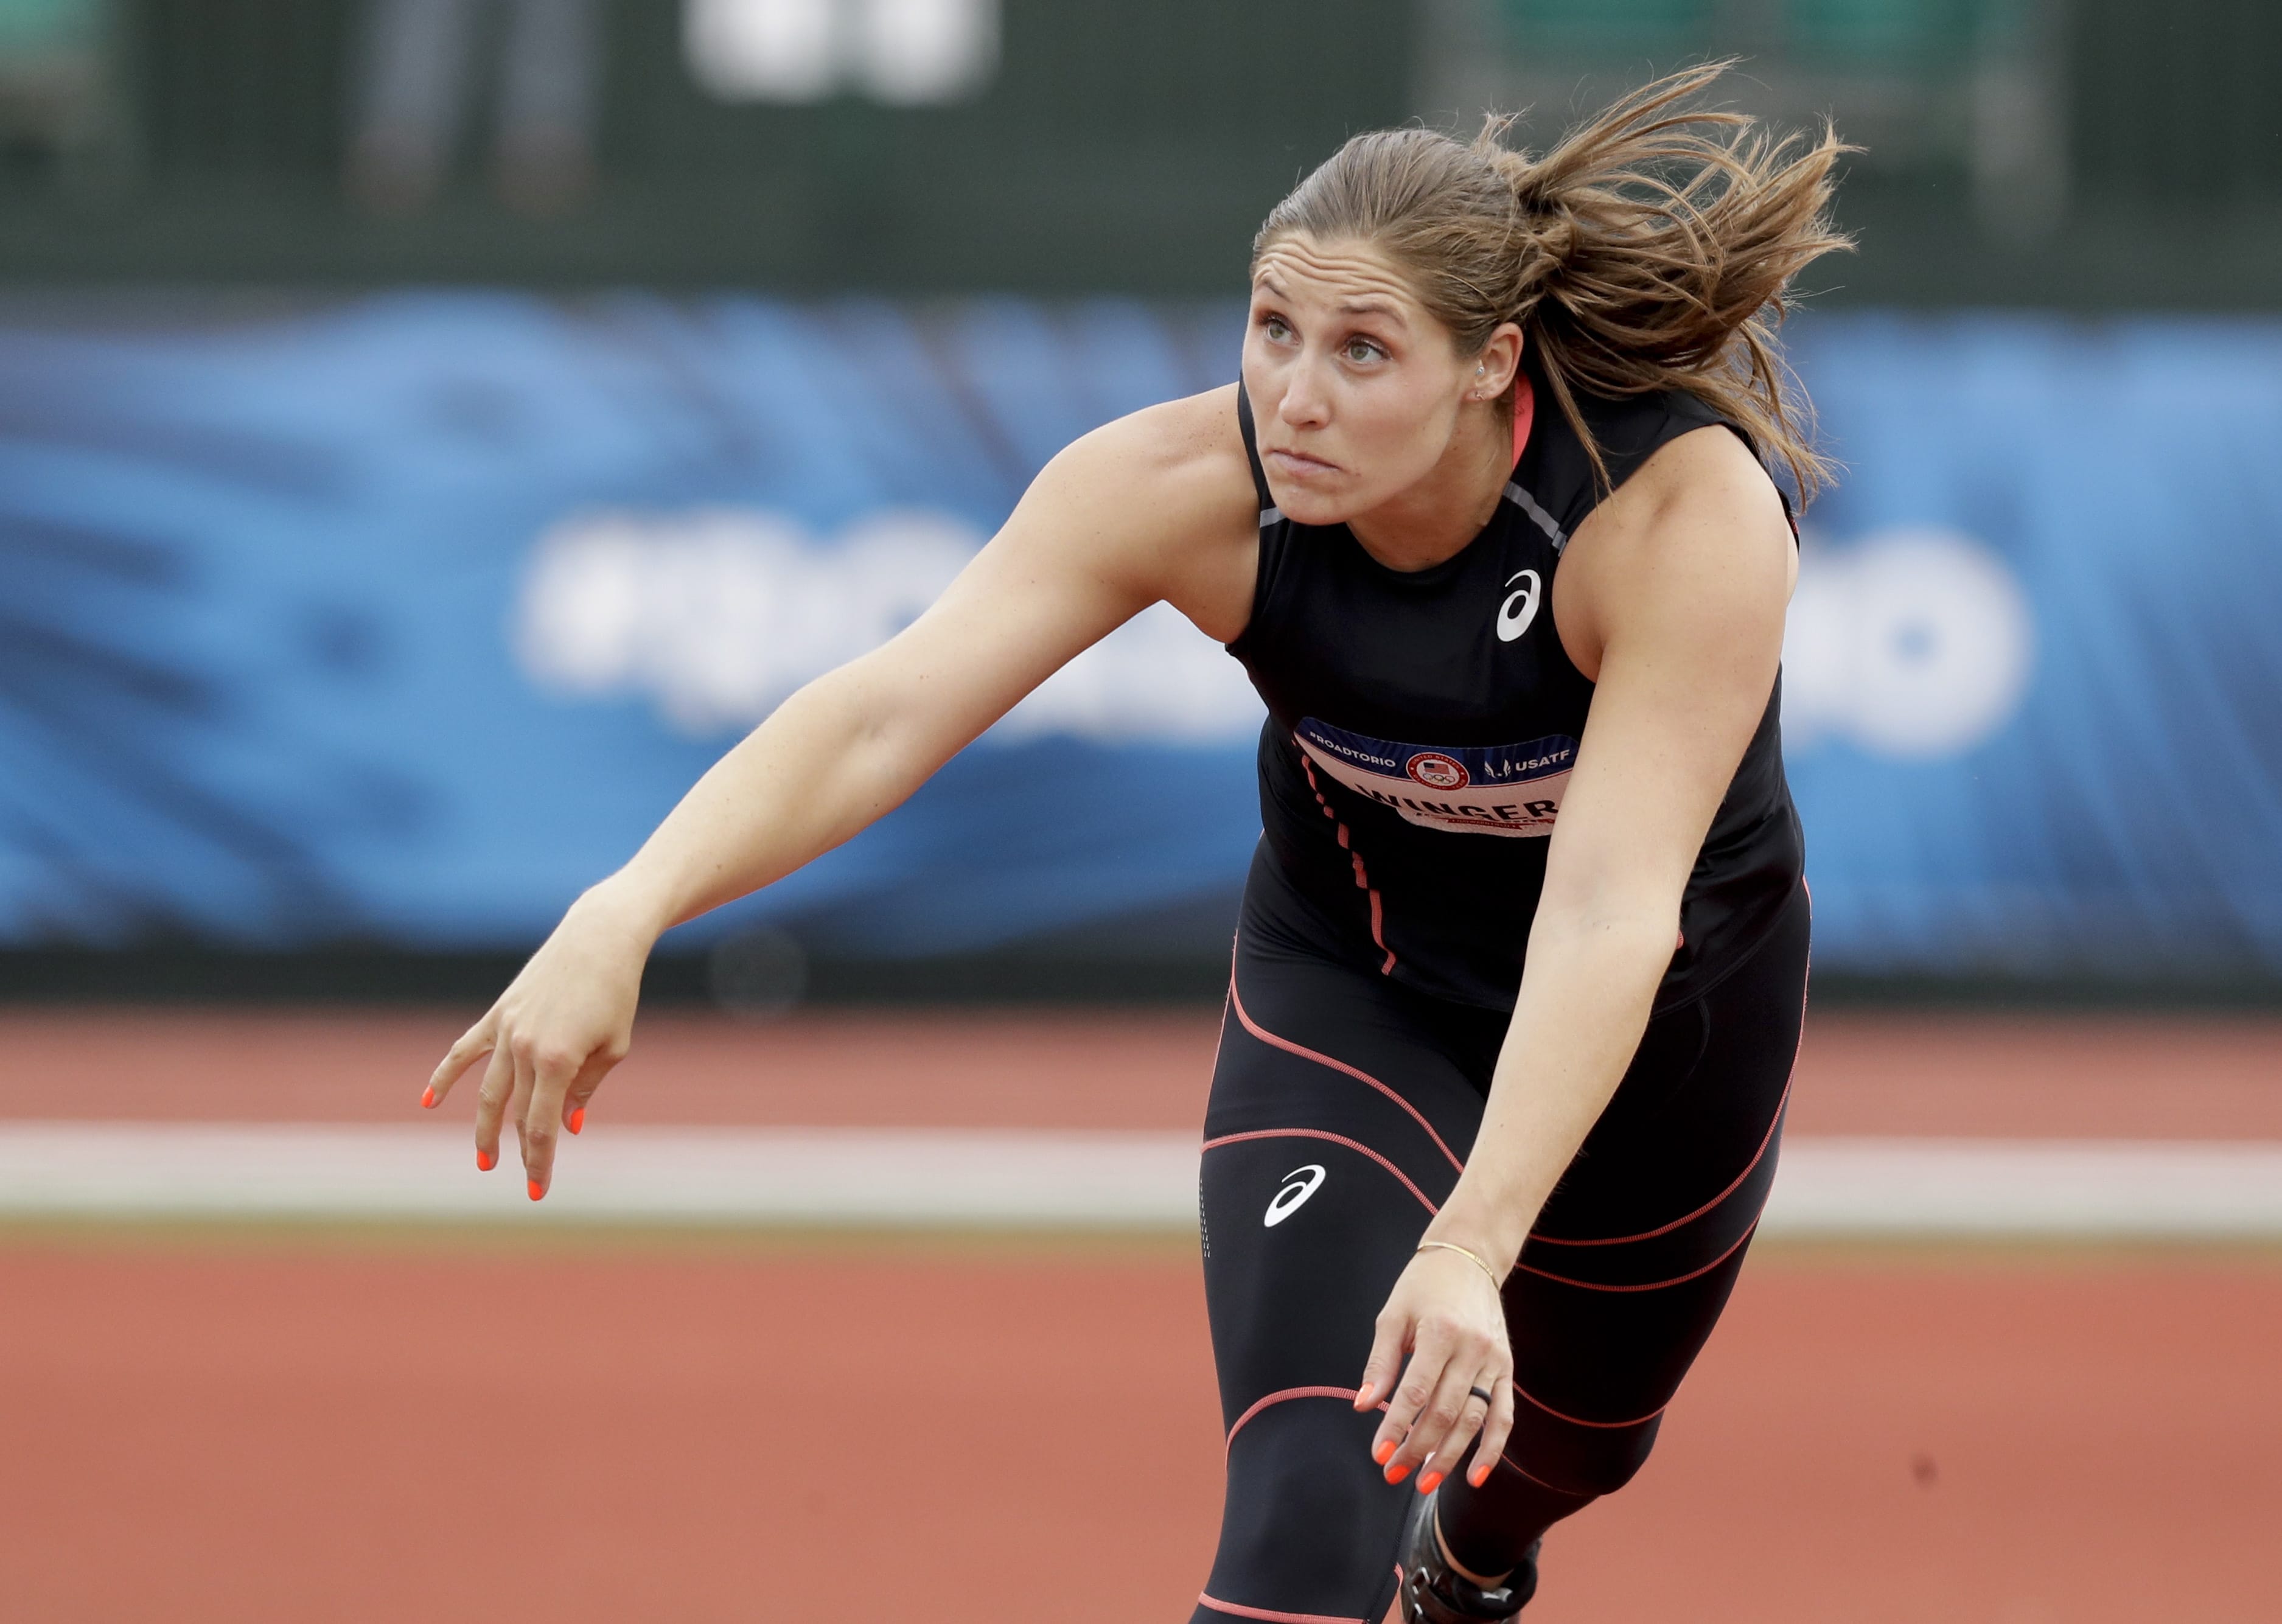 Winger, Efraimson advance at Olympic Trials - The Columbian